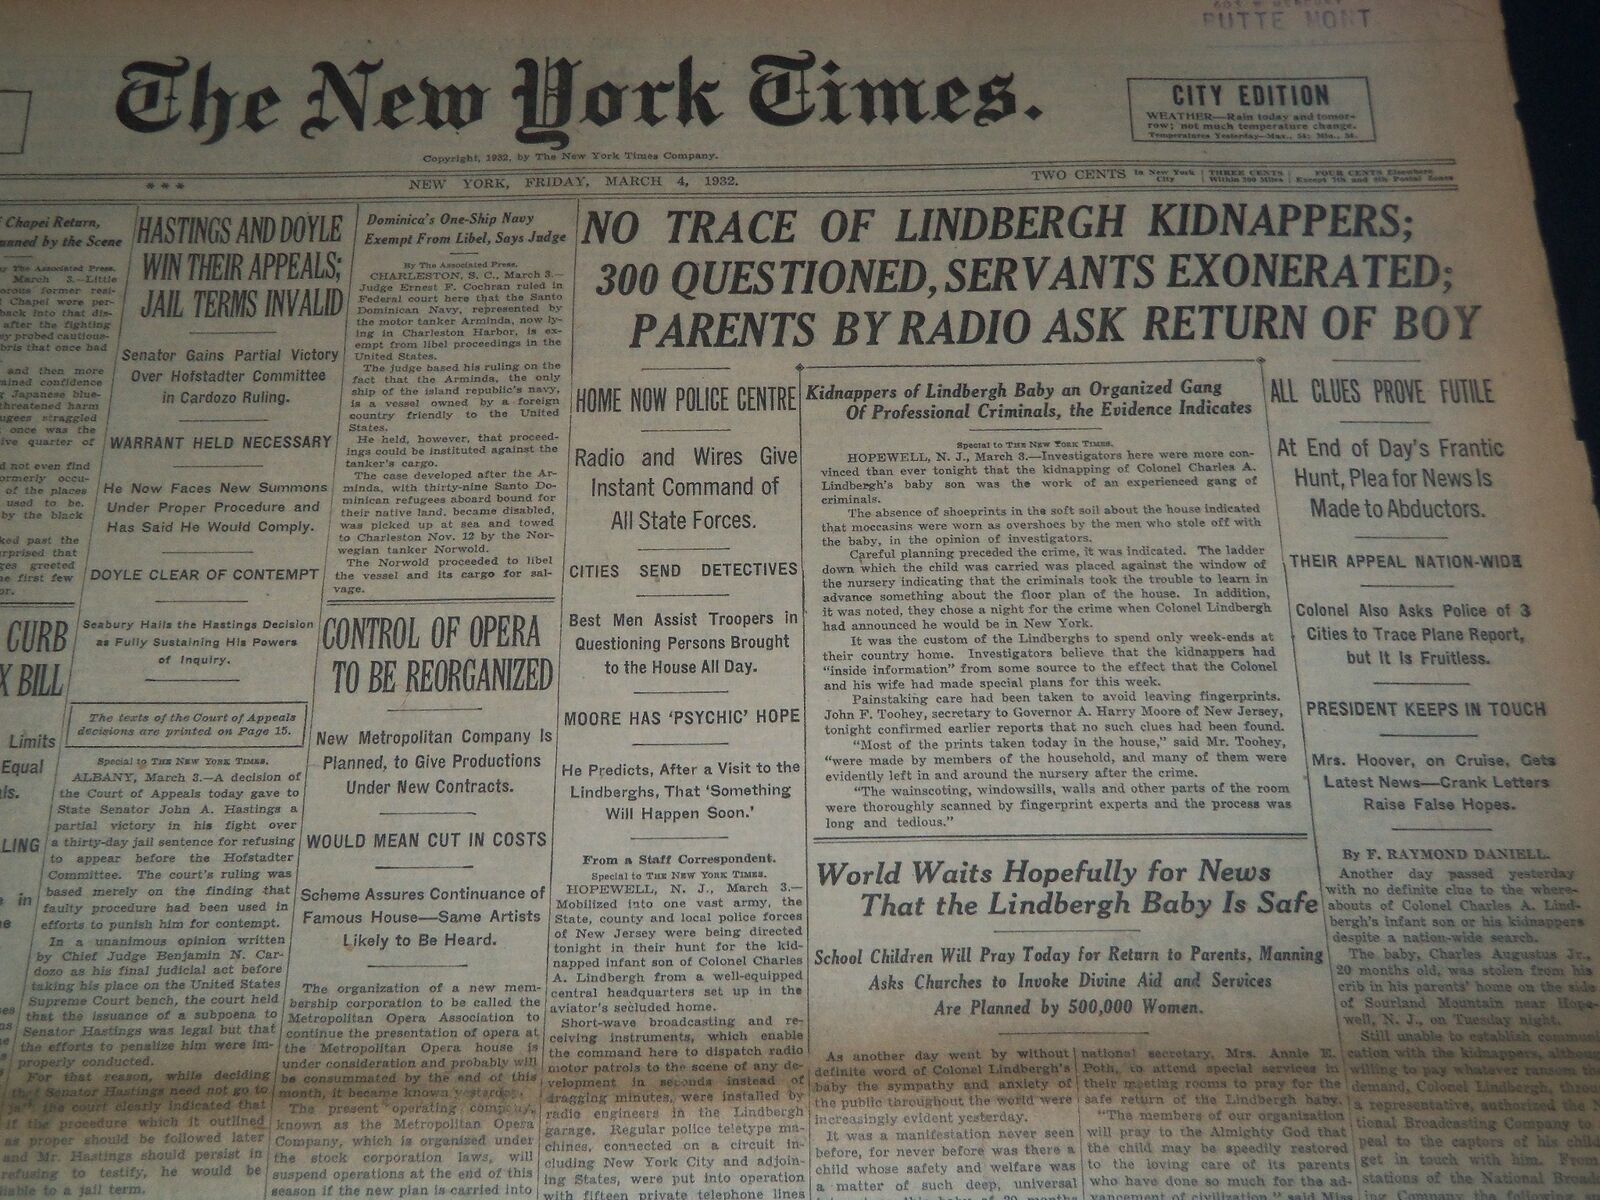 1932 MARCH 4 NEW YORK TIMES - WORLD WAITS HOPEFULLY THAT BABY IS SAFE - NT 7430